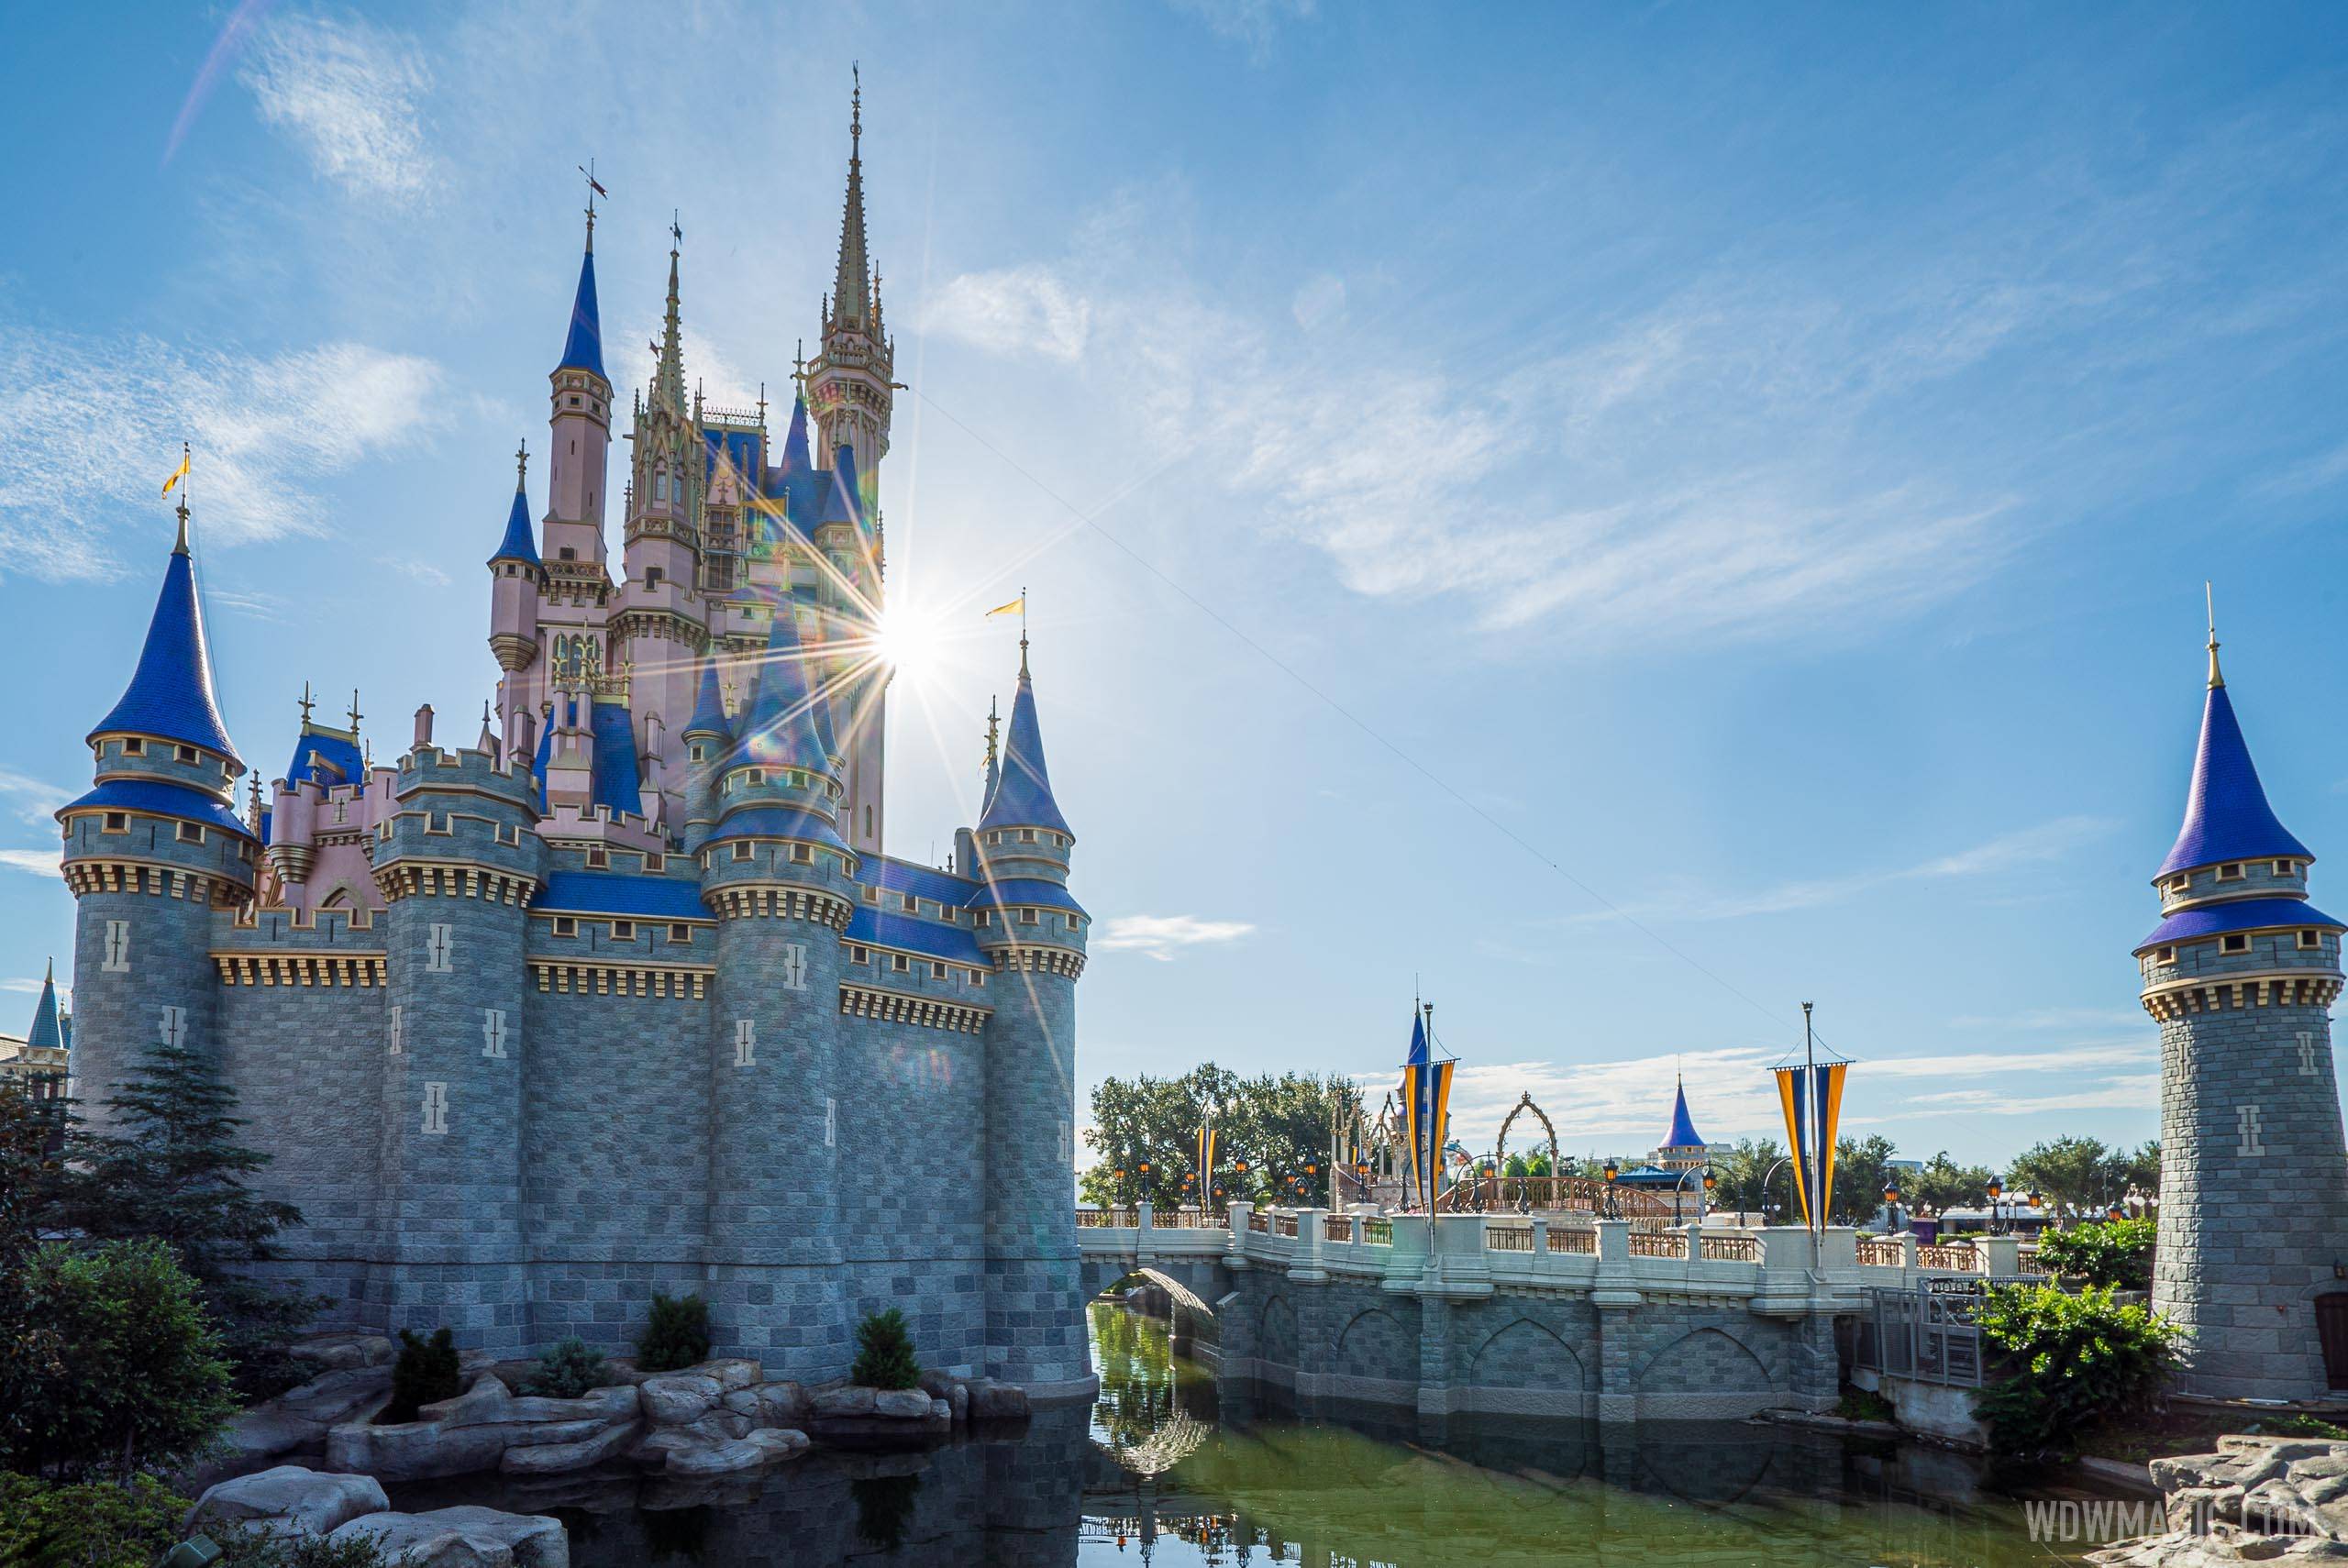 Update on the Cinderella Castle front side refurbishment coming in January 2010